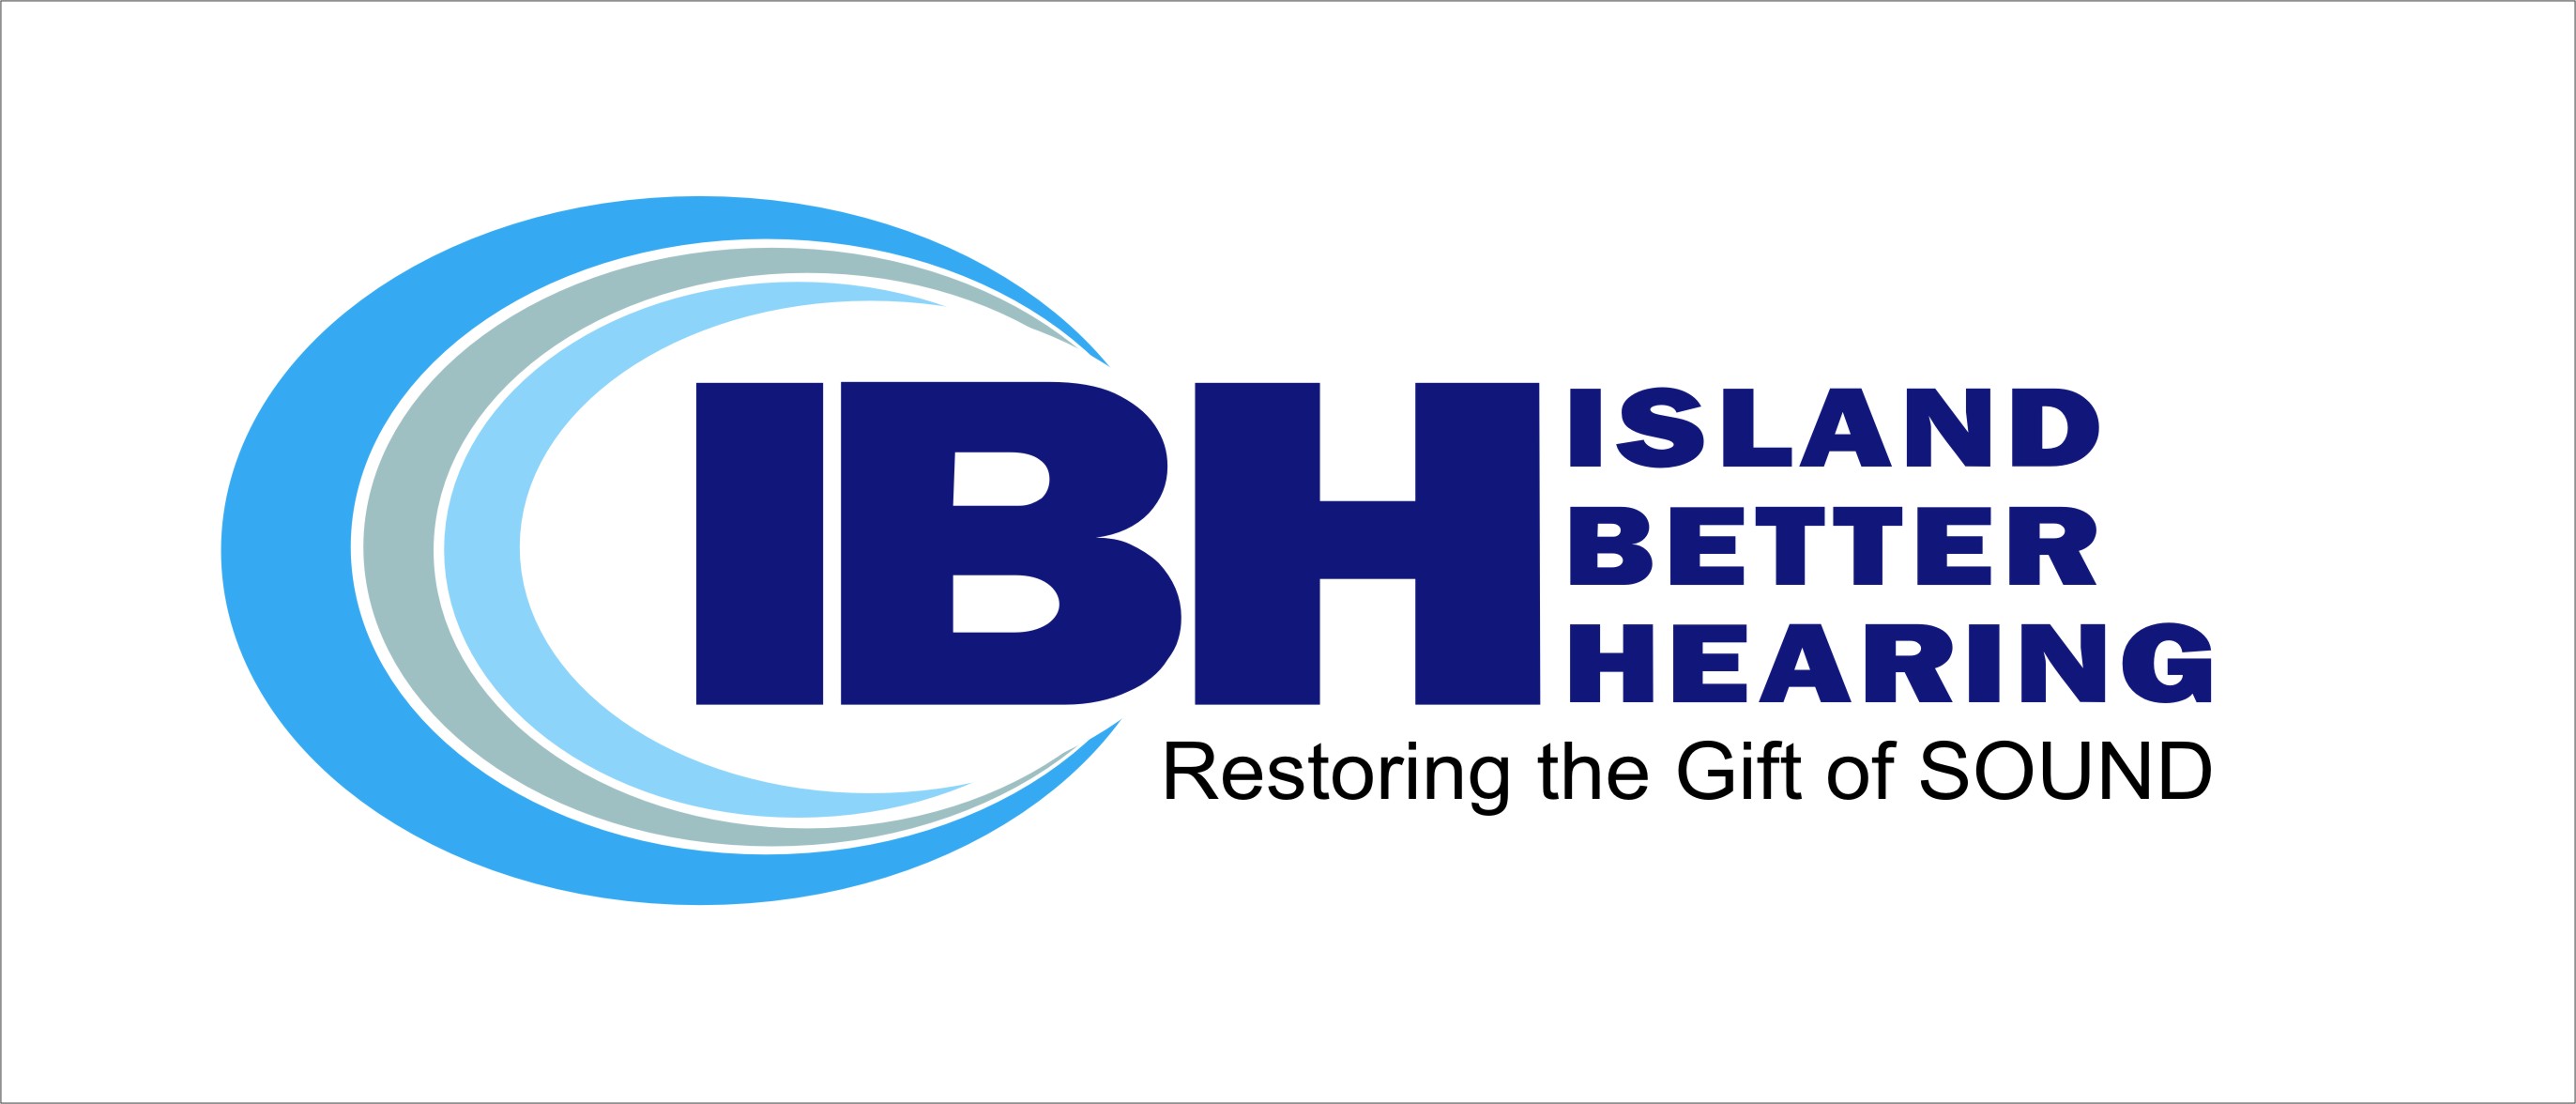 island better hearing restoring the gift of sound